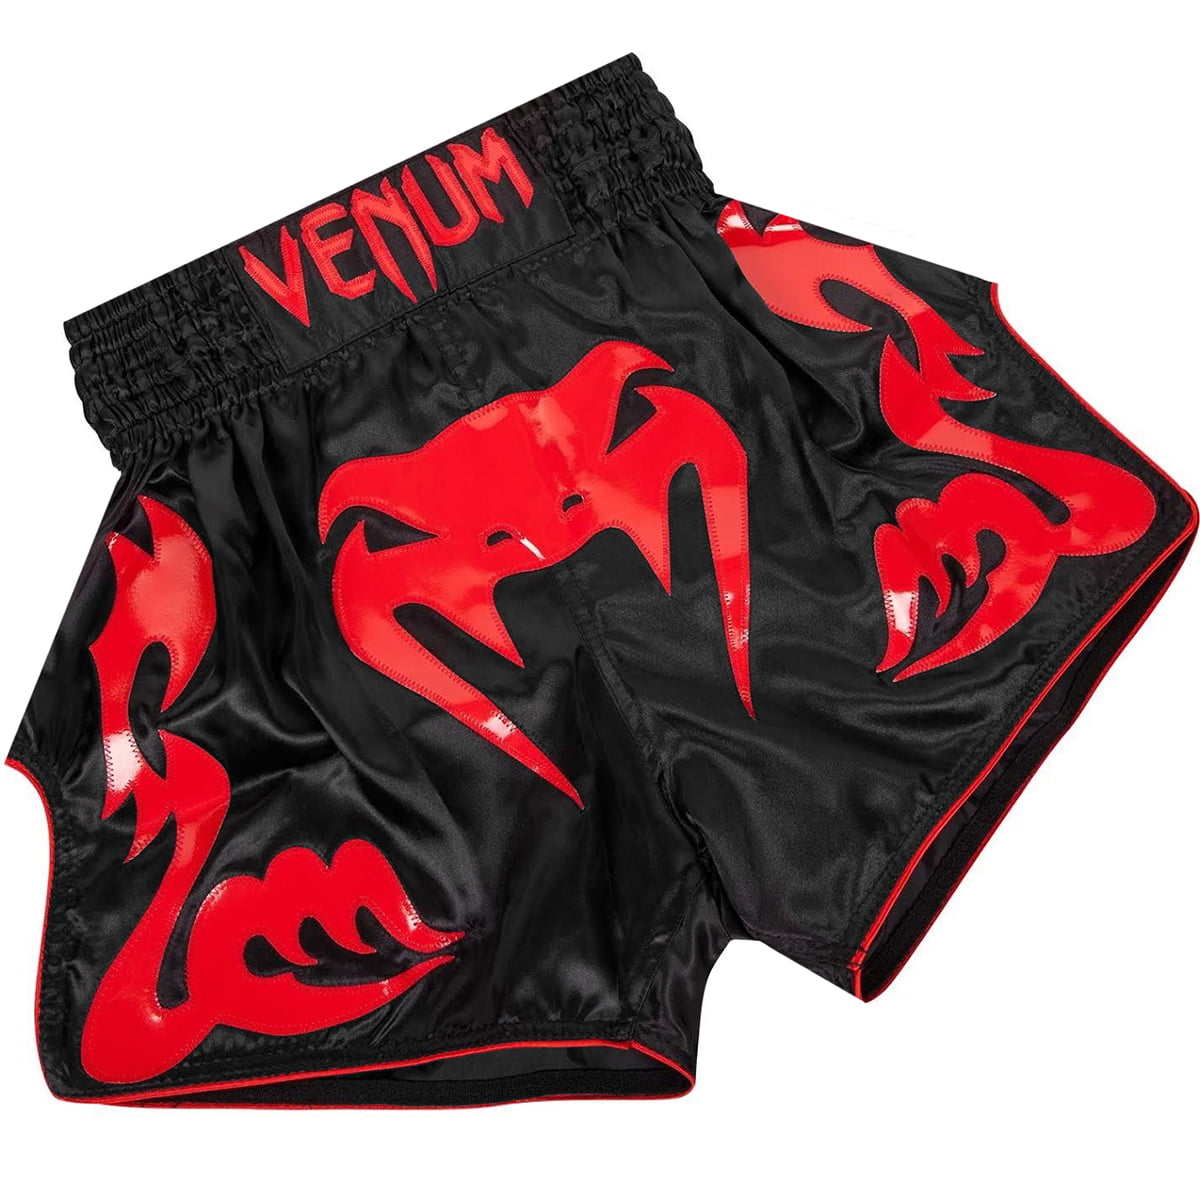 HONEST REVIEW of All My Muay Thai Shorts! - YouTube